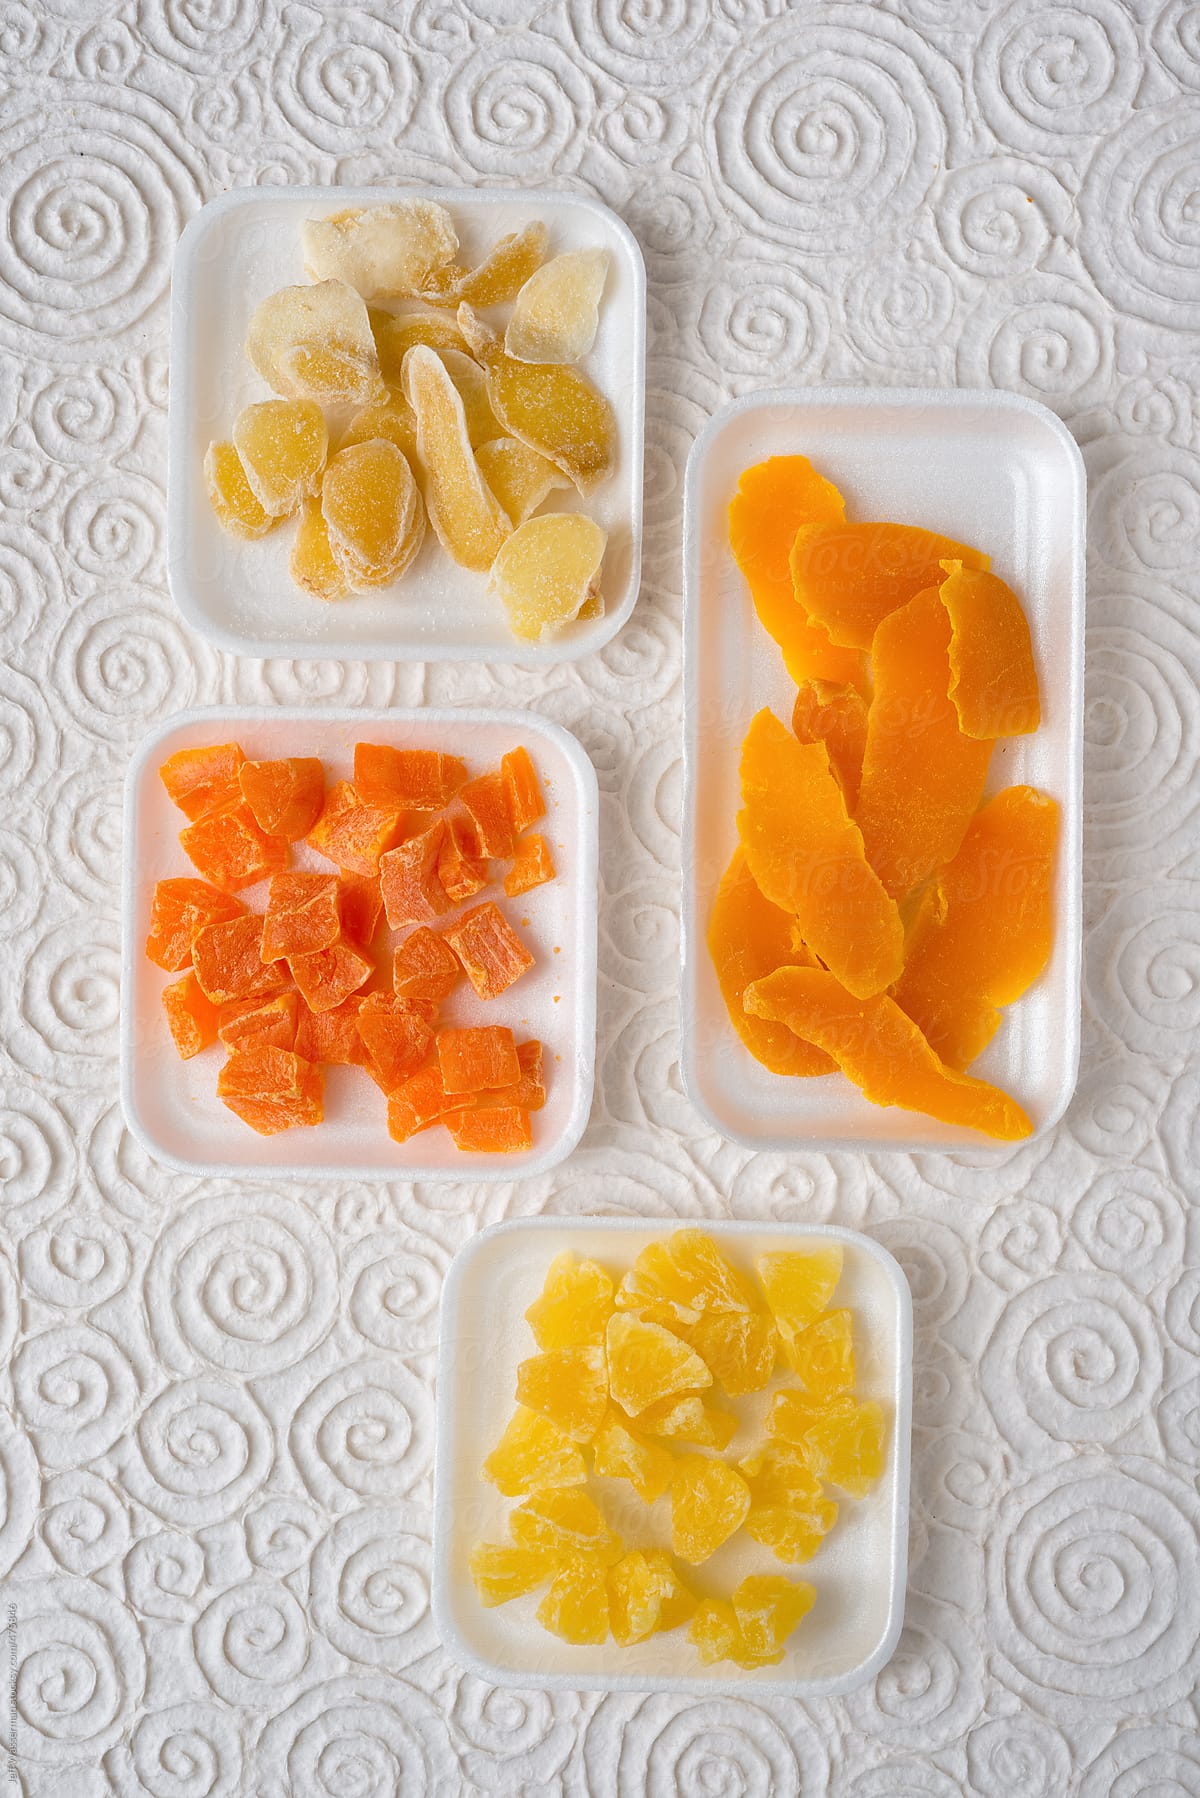 Assortment of Dried Fruits